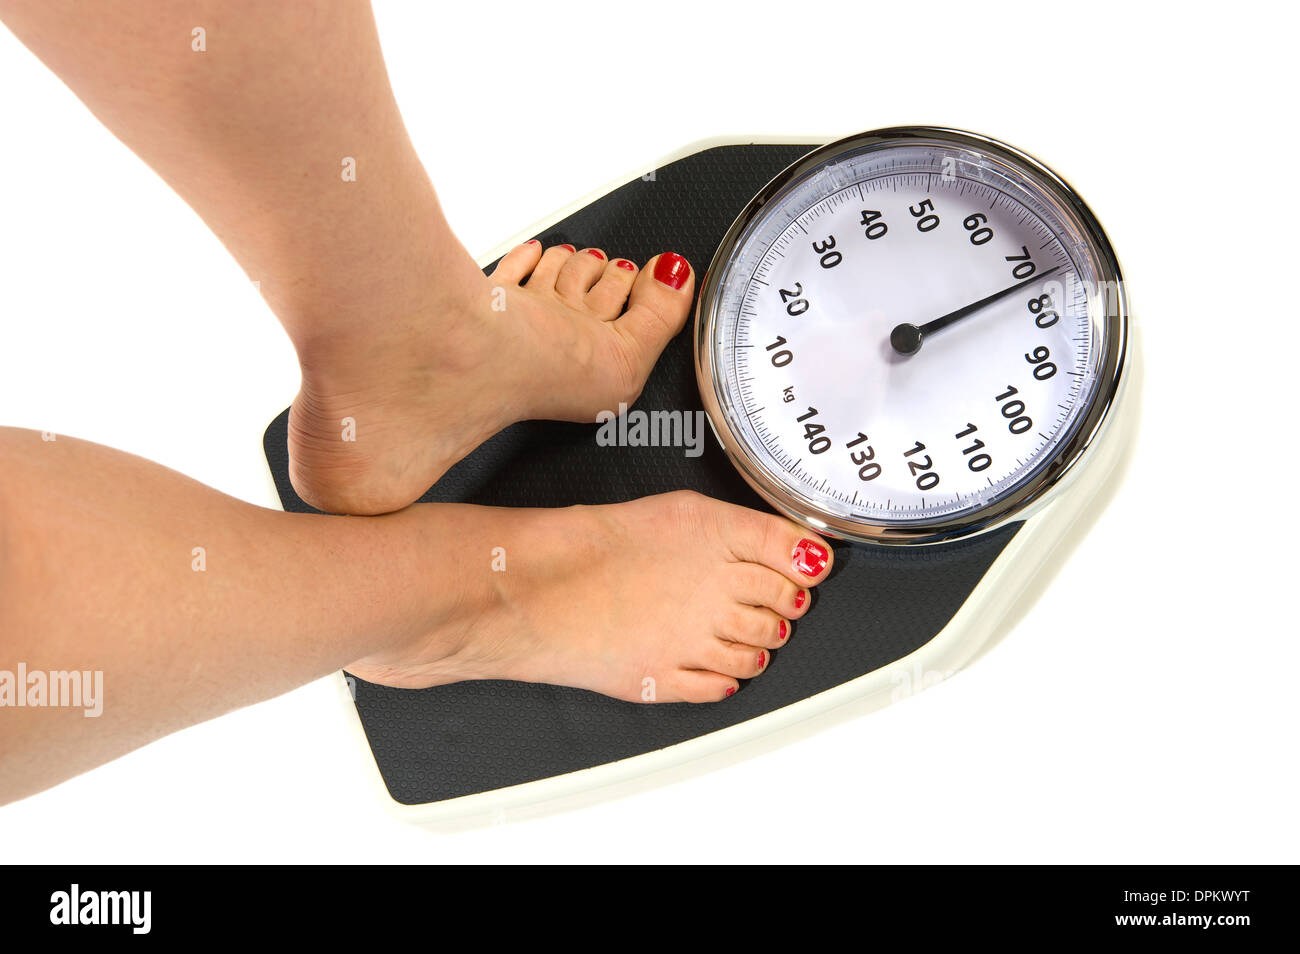 https://c8.alamy.com/comp/DPKWYT/a-woman-standing-on-a-weight-scale-DPKWYT.jpg